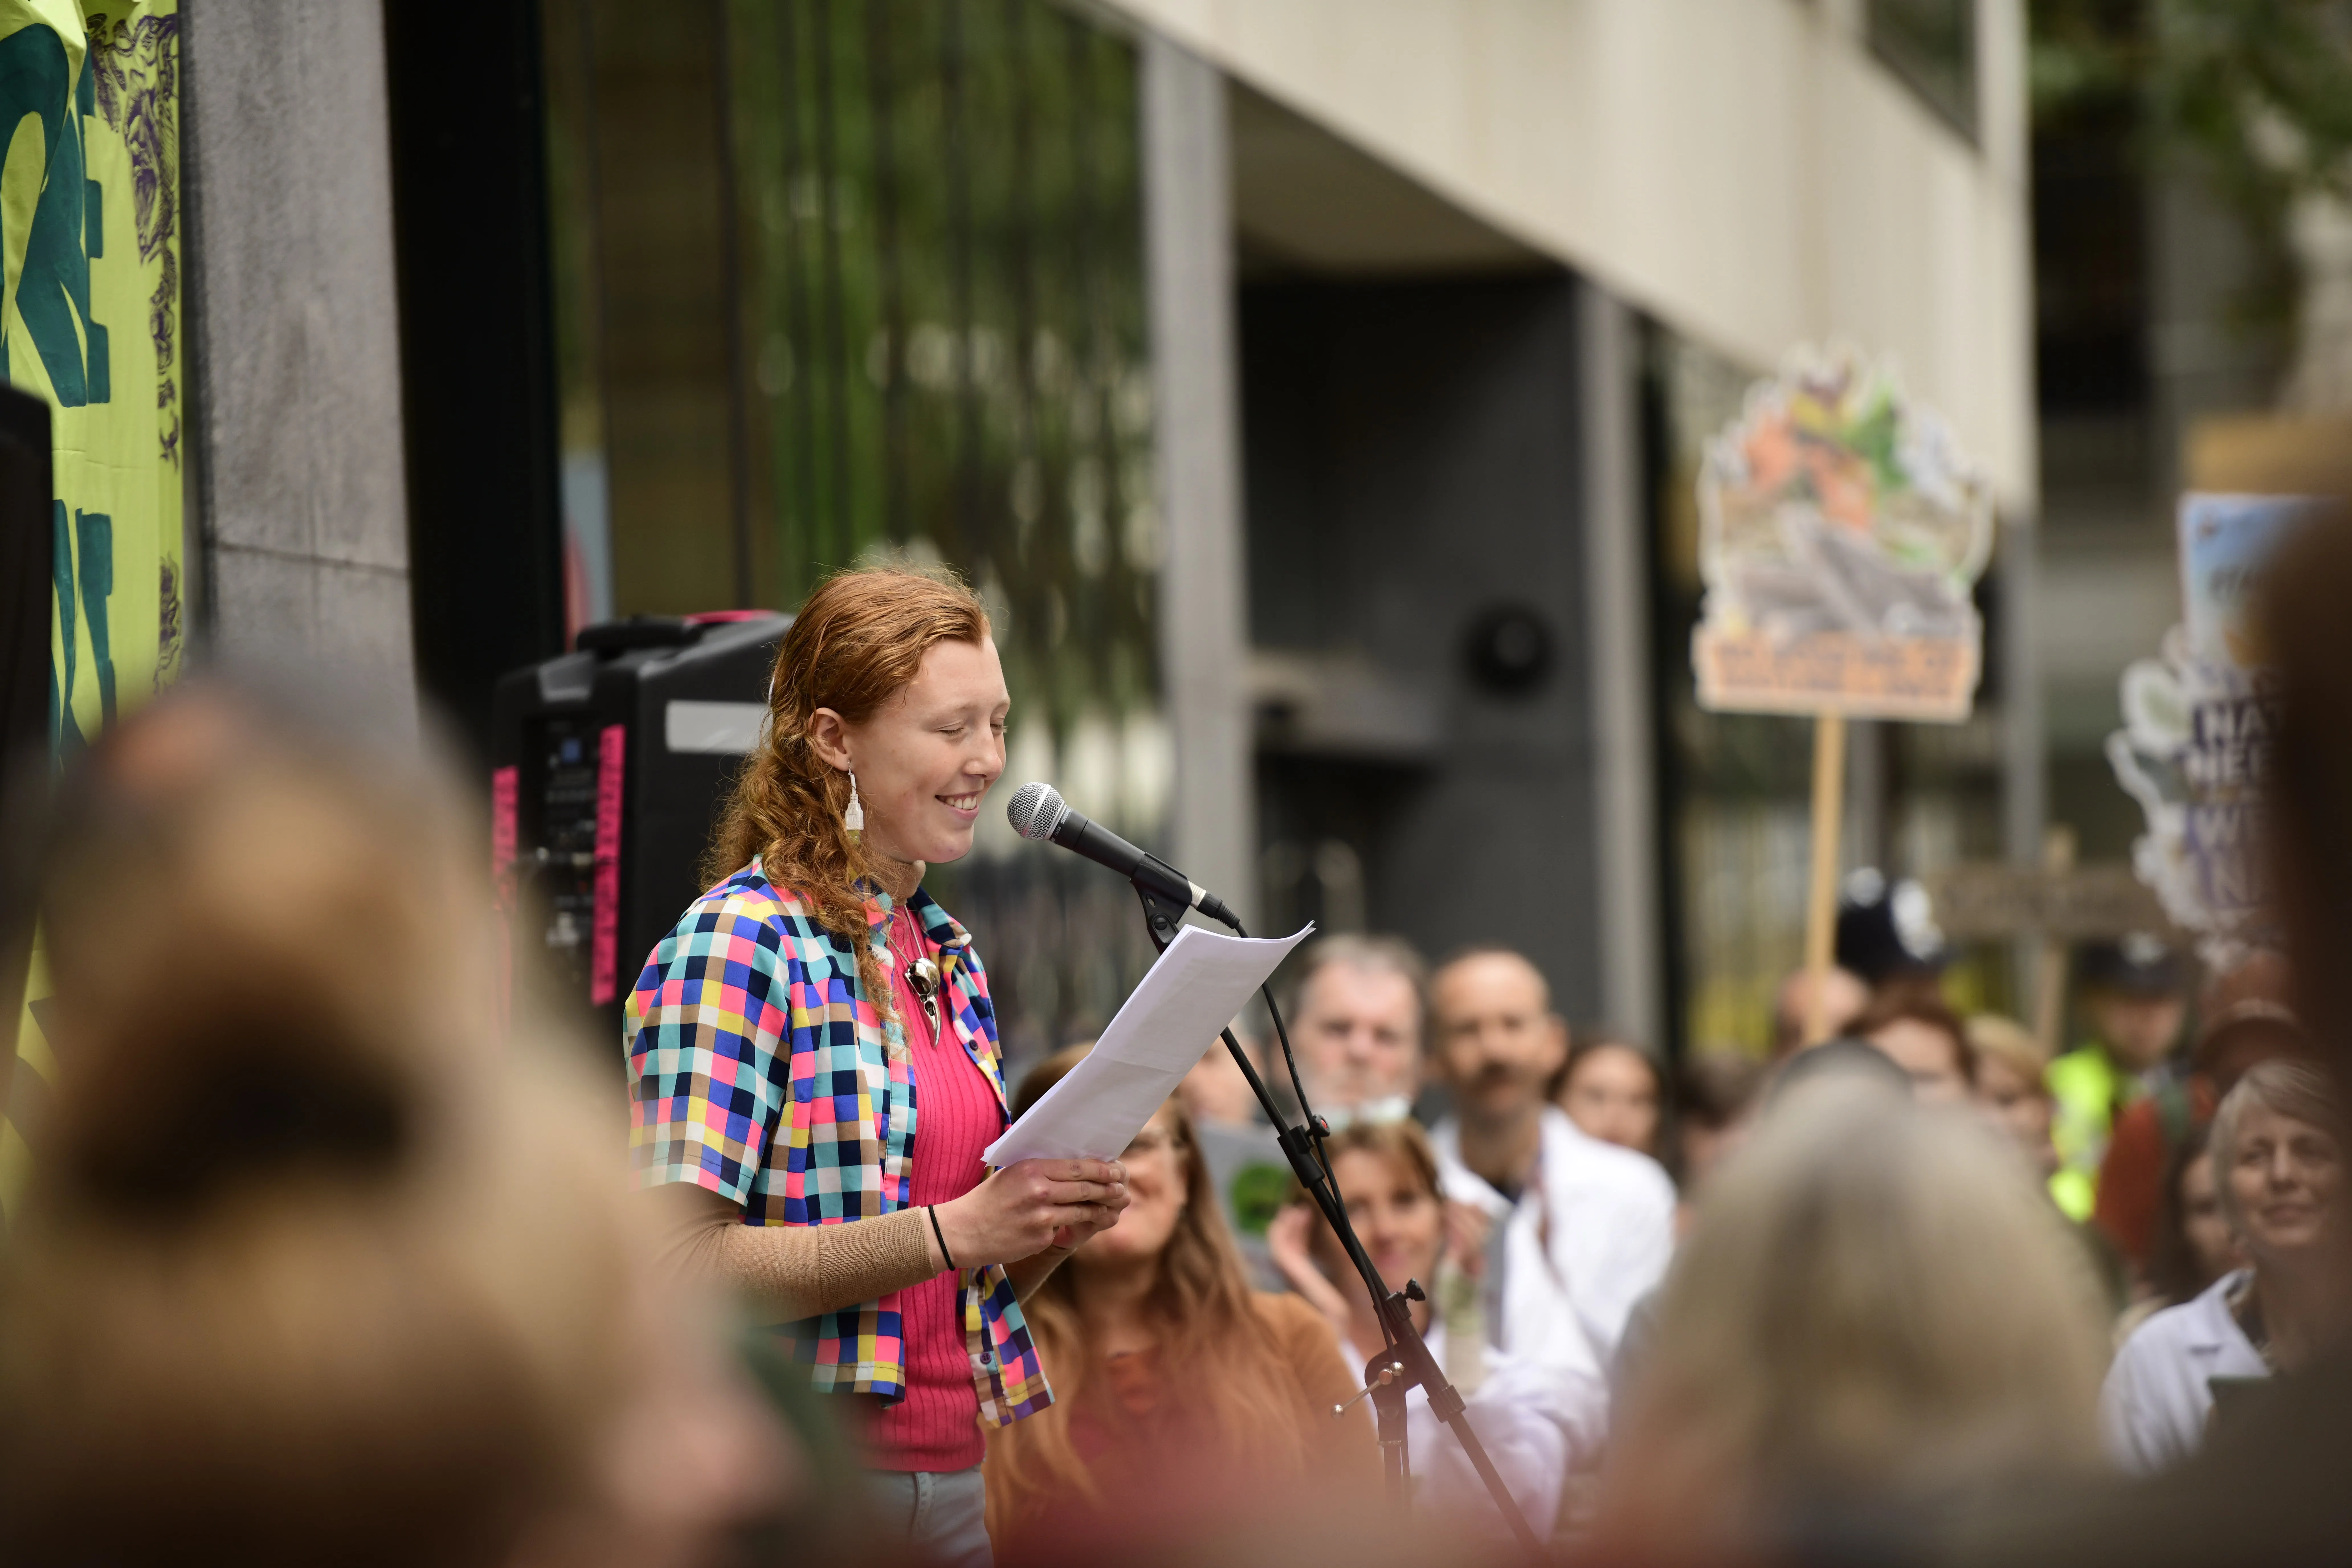 A youth council member speaks in front of a crowd at an event.